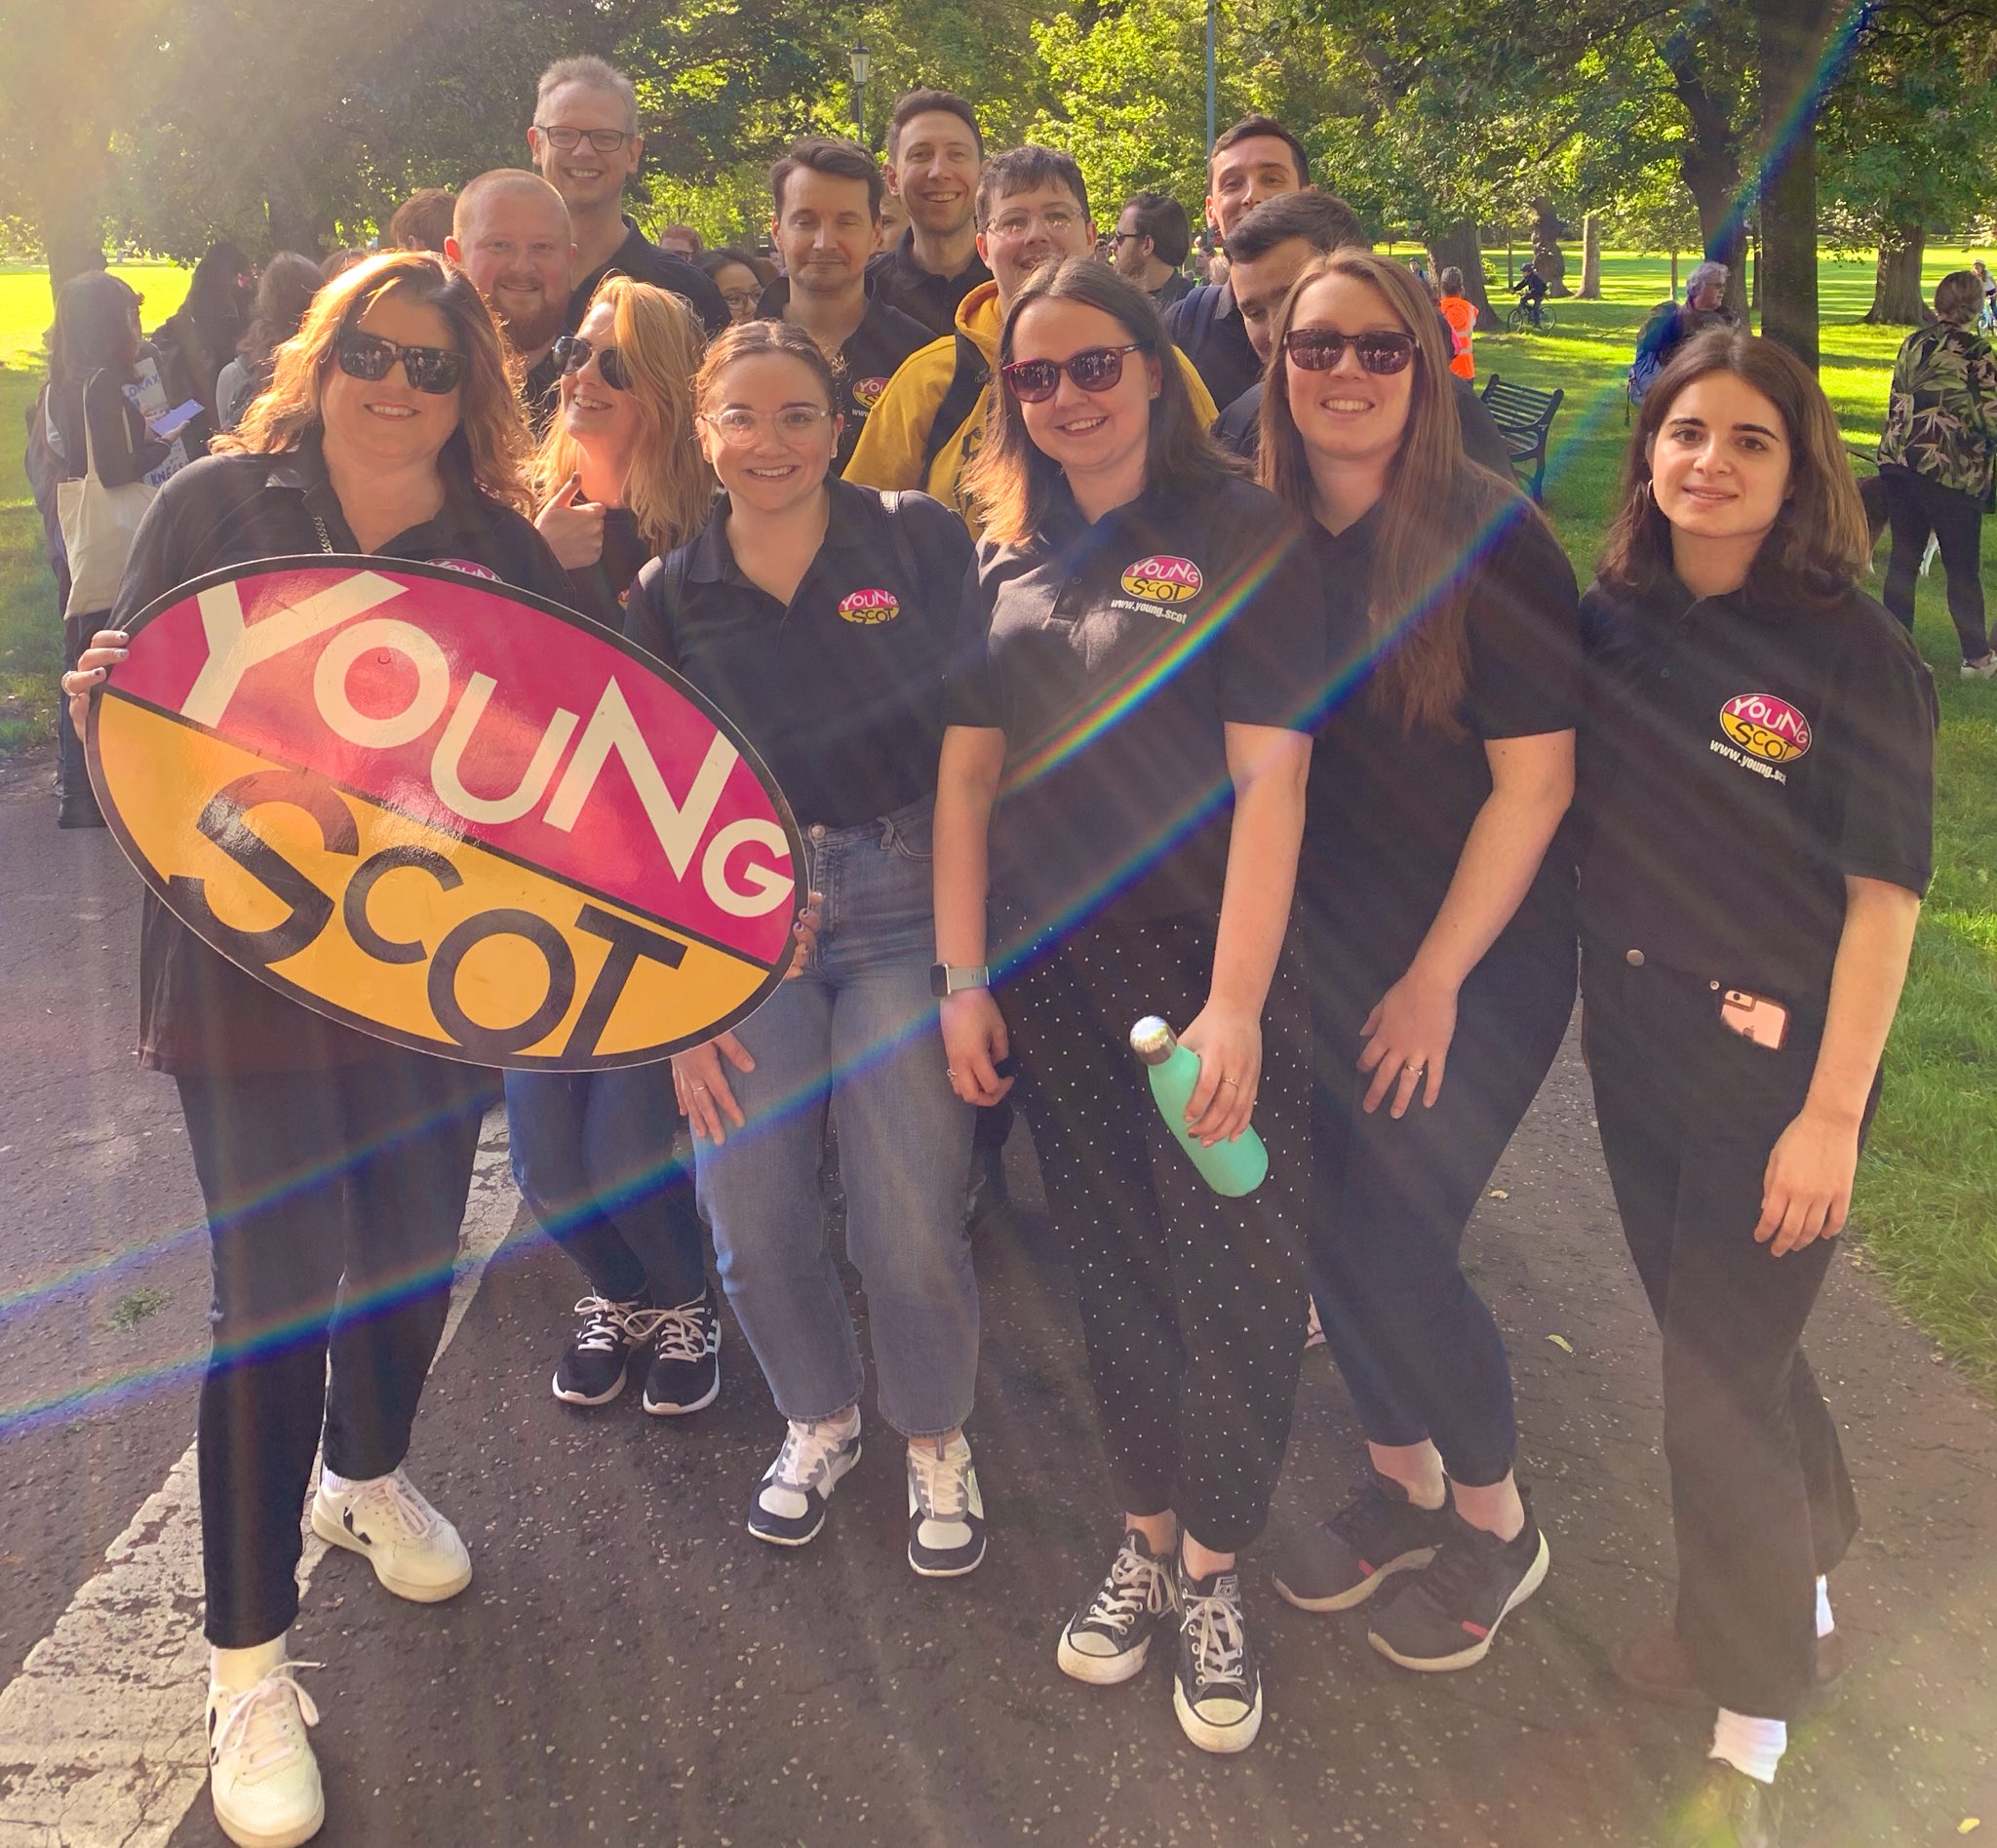 Members of Young Scot Staff attending the Youth Climate Strike during September 2019 in Edinburgh